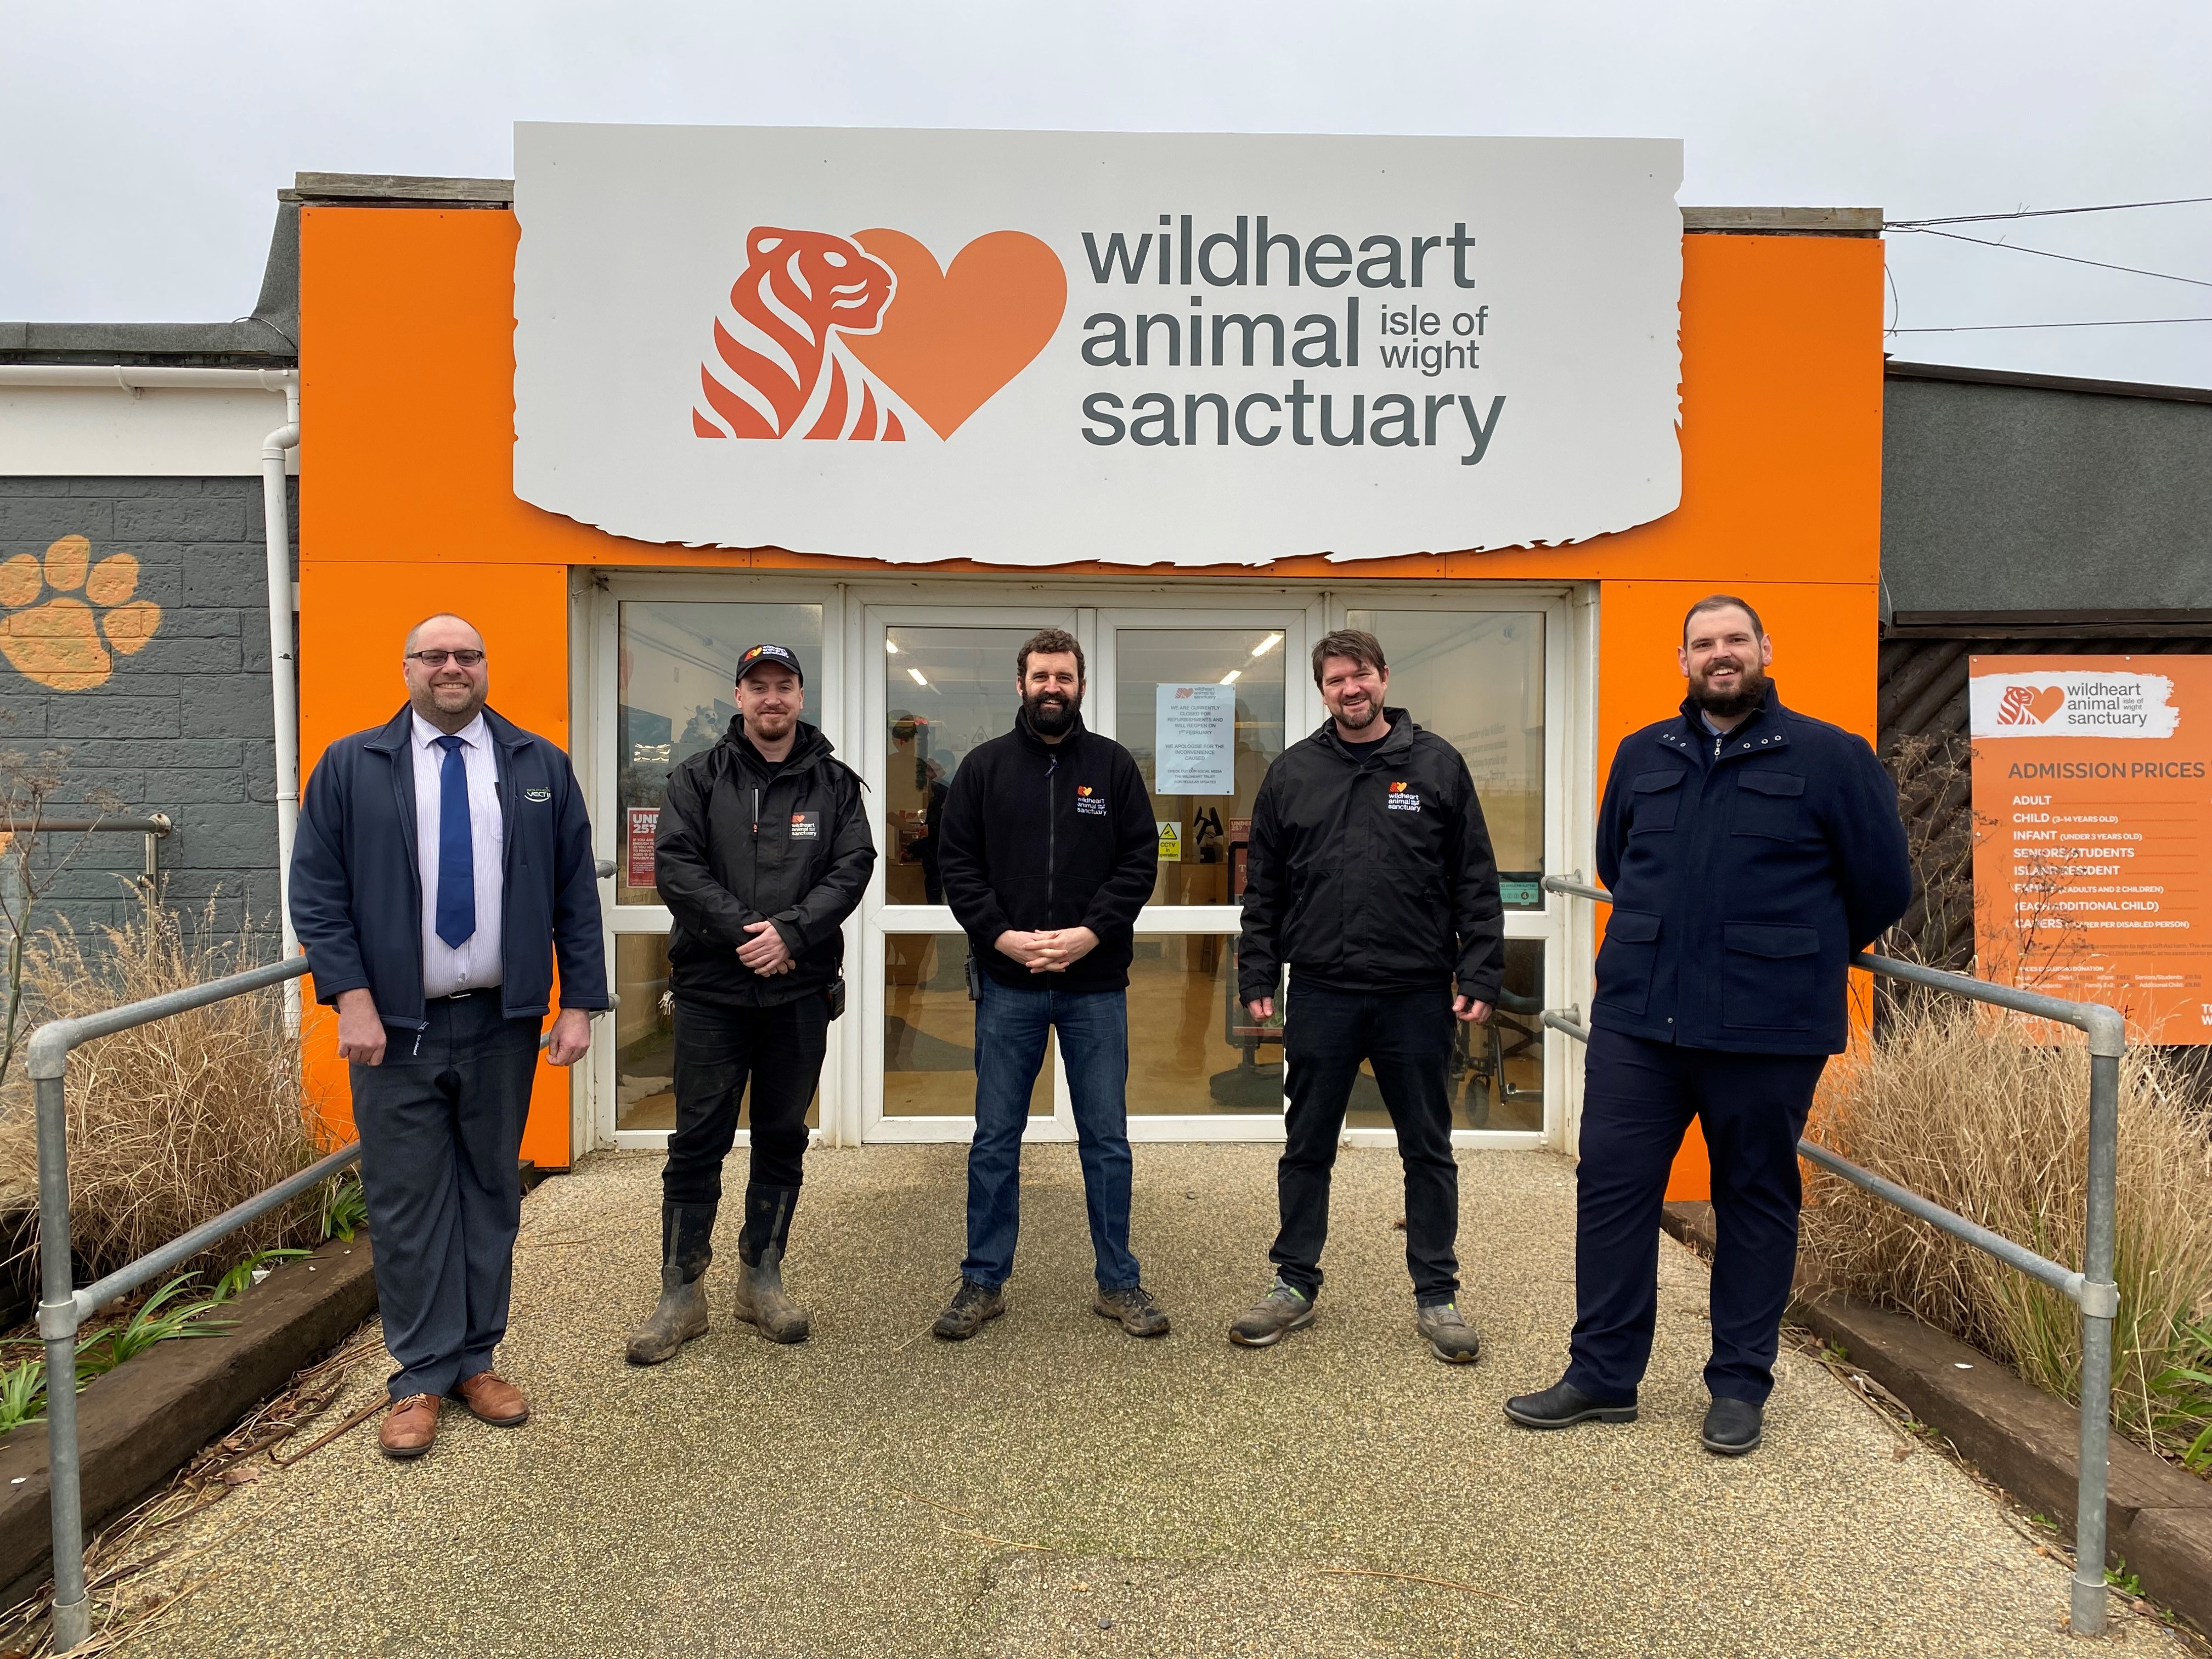 staff from southern vectis and wildheart animal sanctuary outside